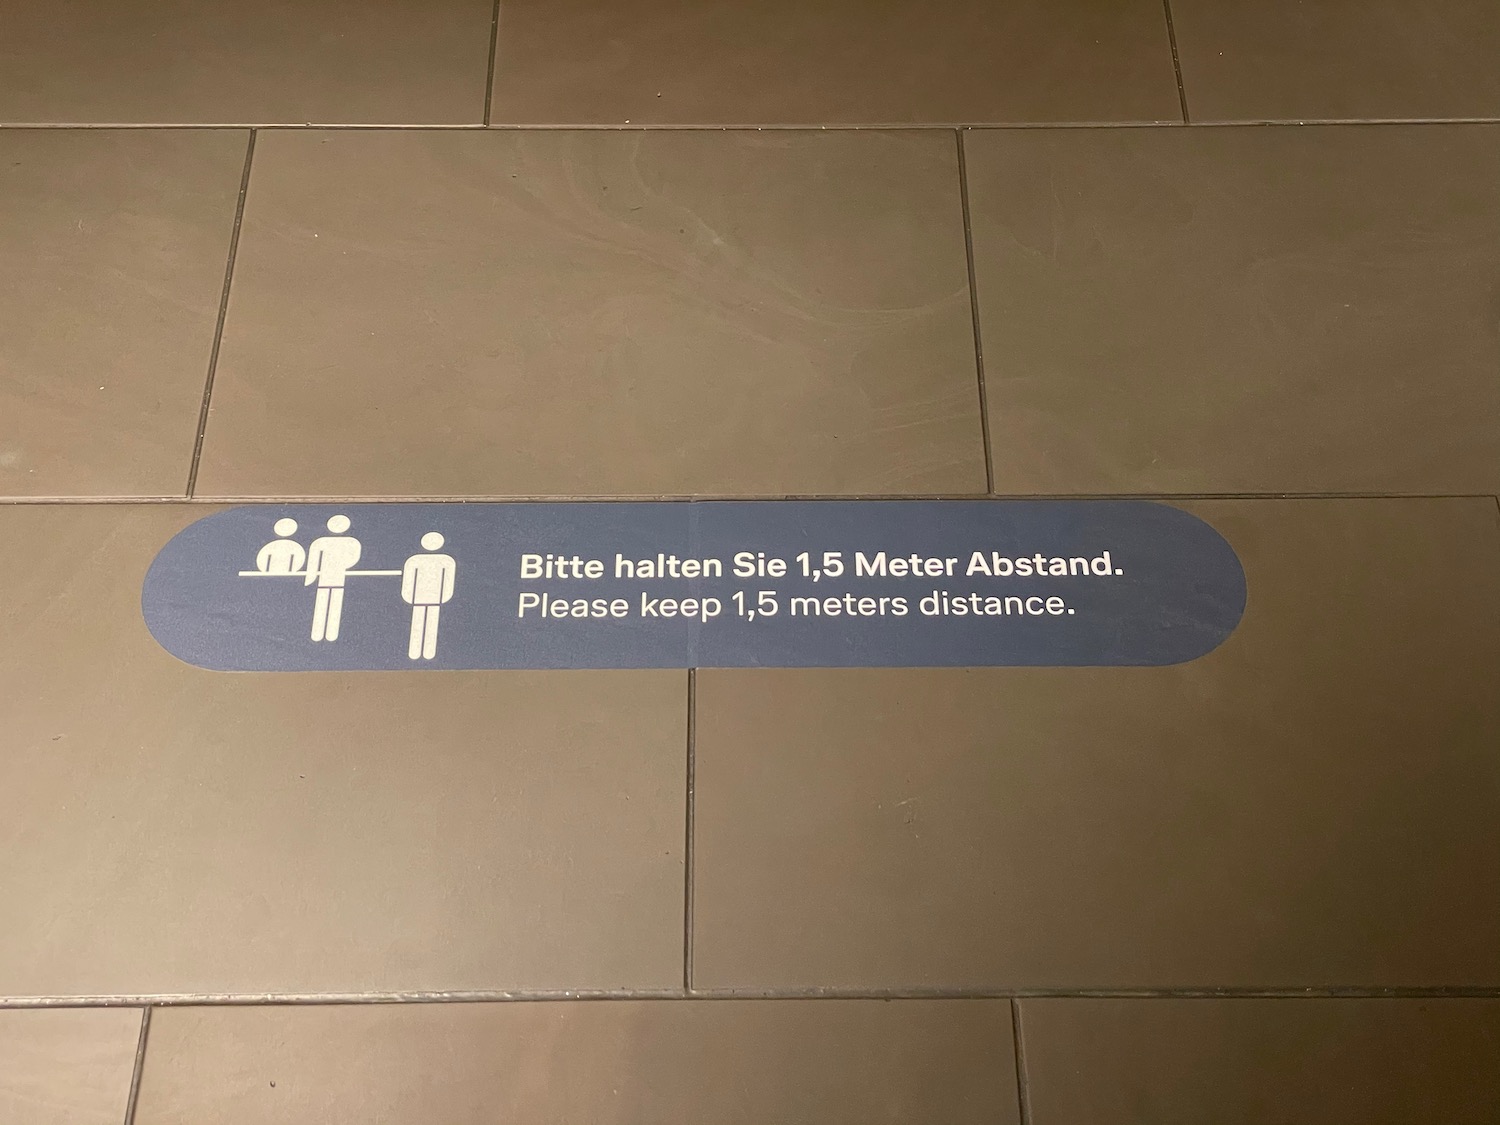 a sign on the floor